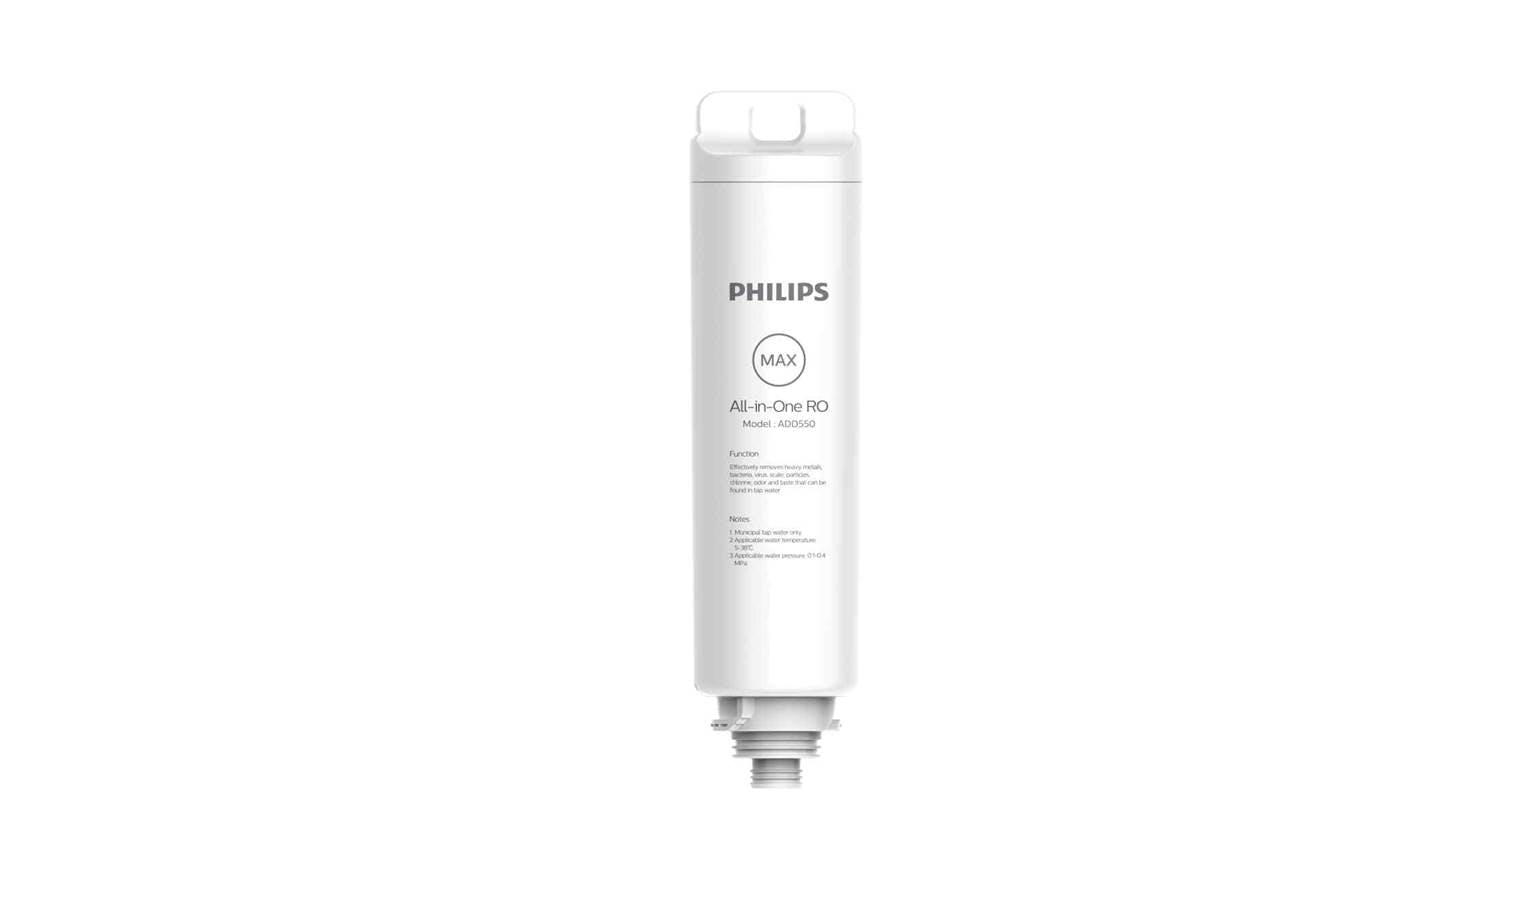 Philips White Water Purification for sale